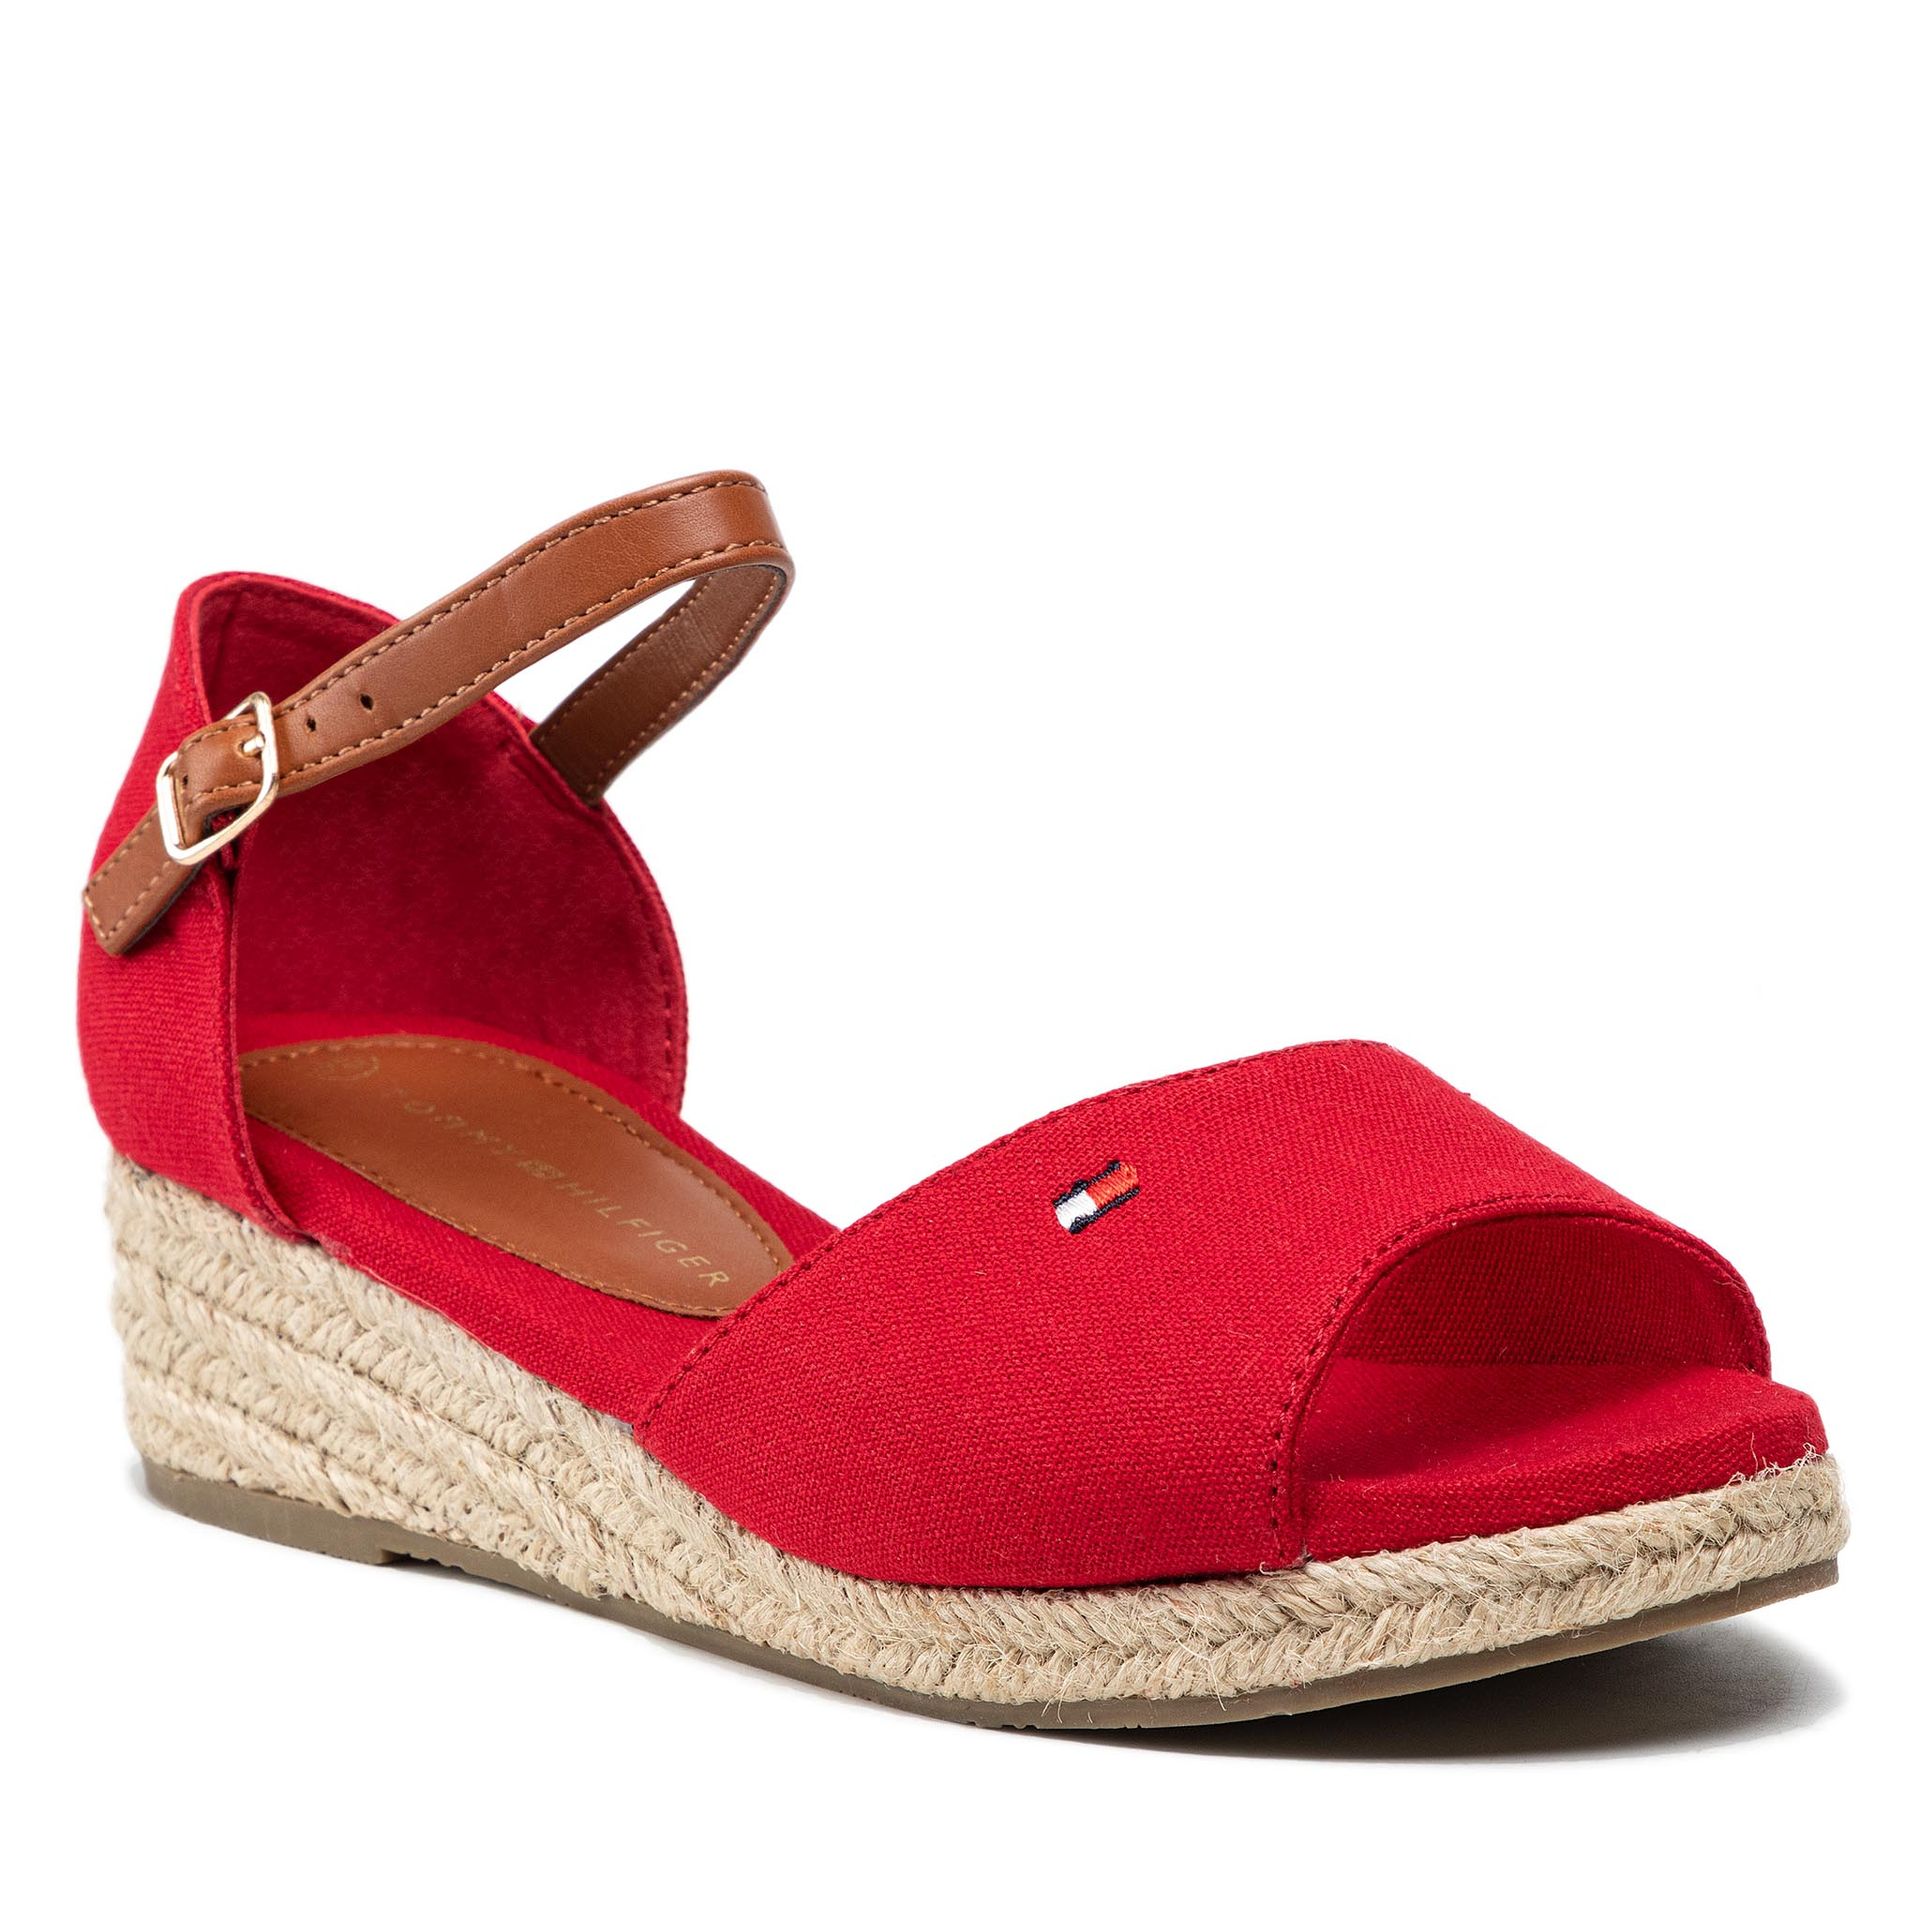 Tommy Hilfiger Espadryle Rope Wedge Sandal T3A7-32185-0048 M Red 300